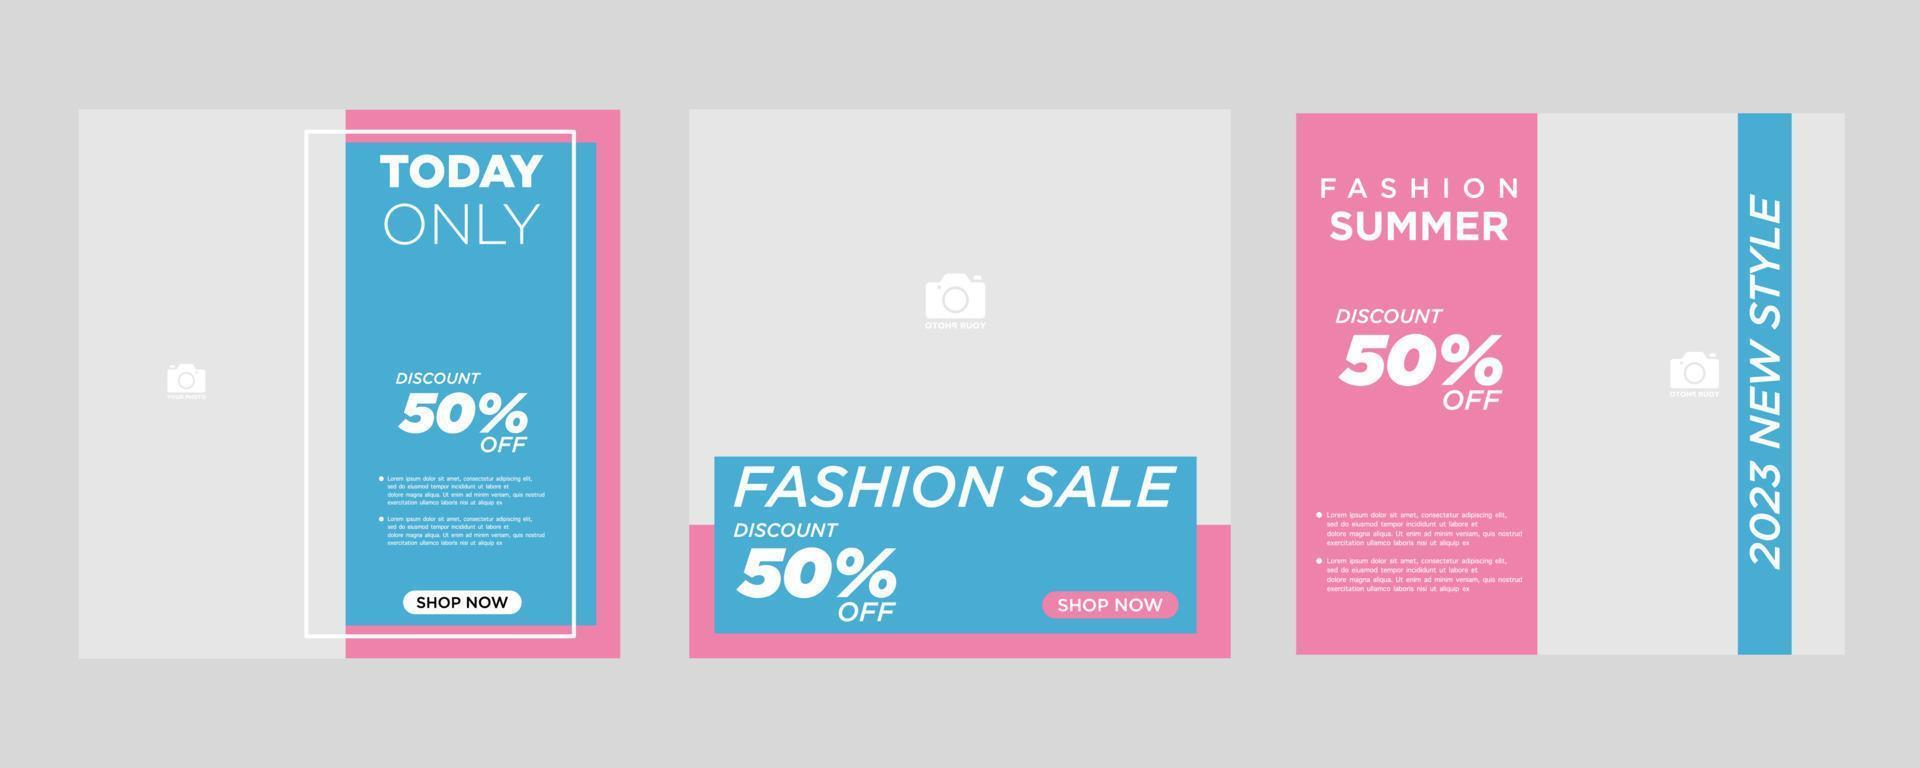 Editable minimal square banner template set. Suitable for social media post and internet advertising web.banner fashion style vector